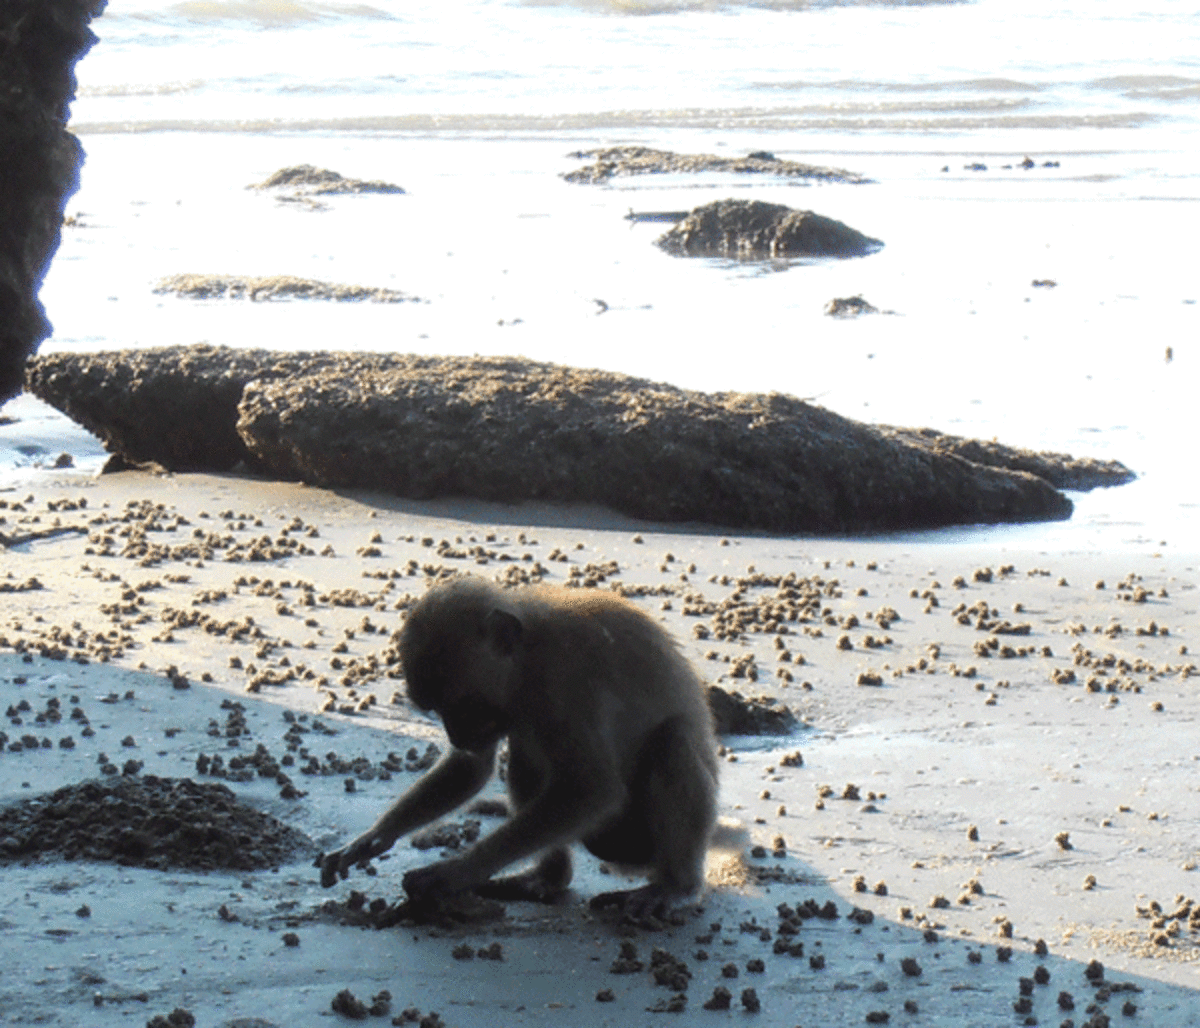 Young monkey learning to find crabs